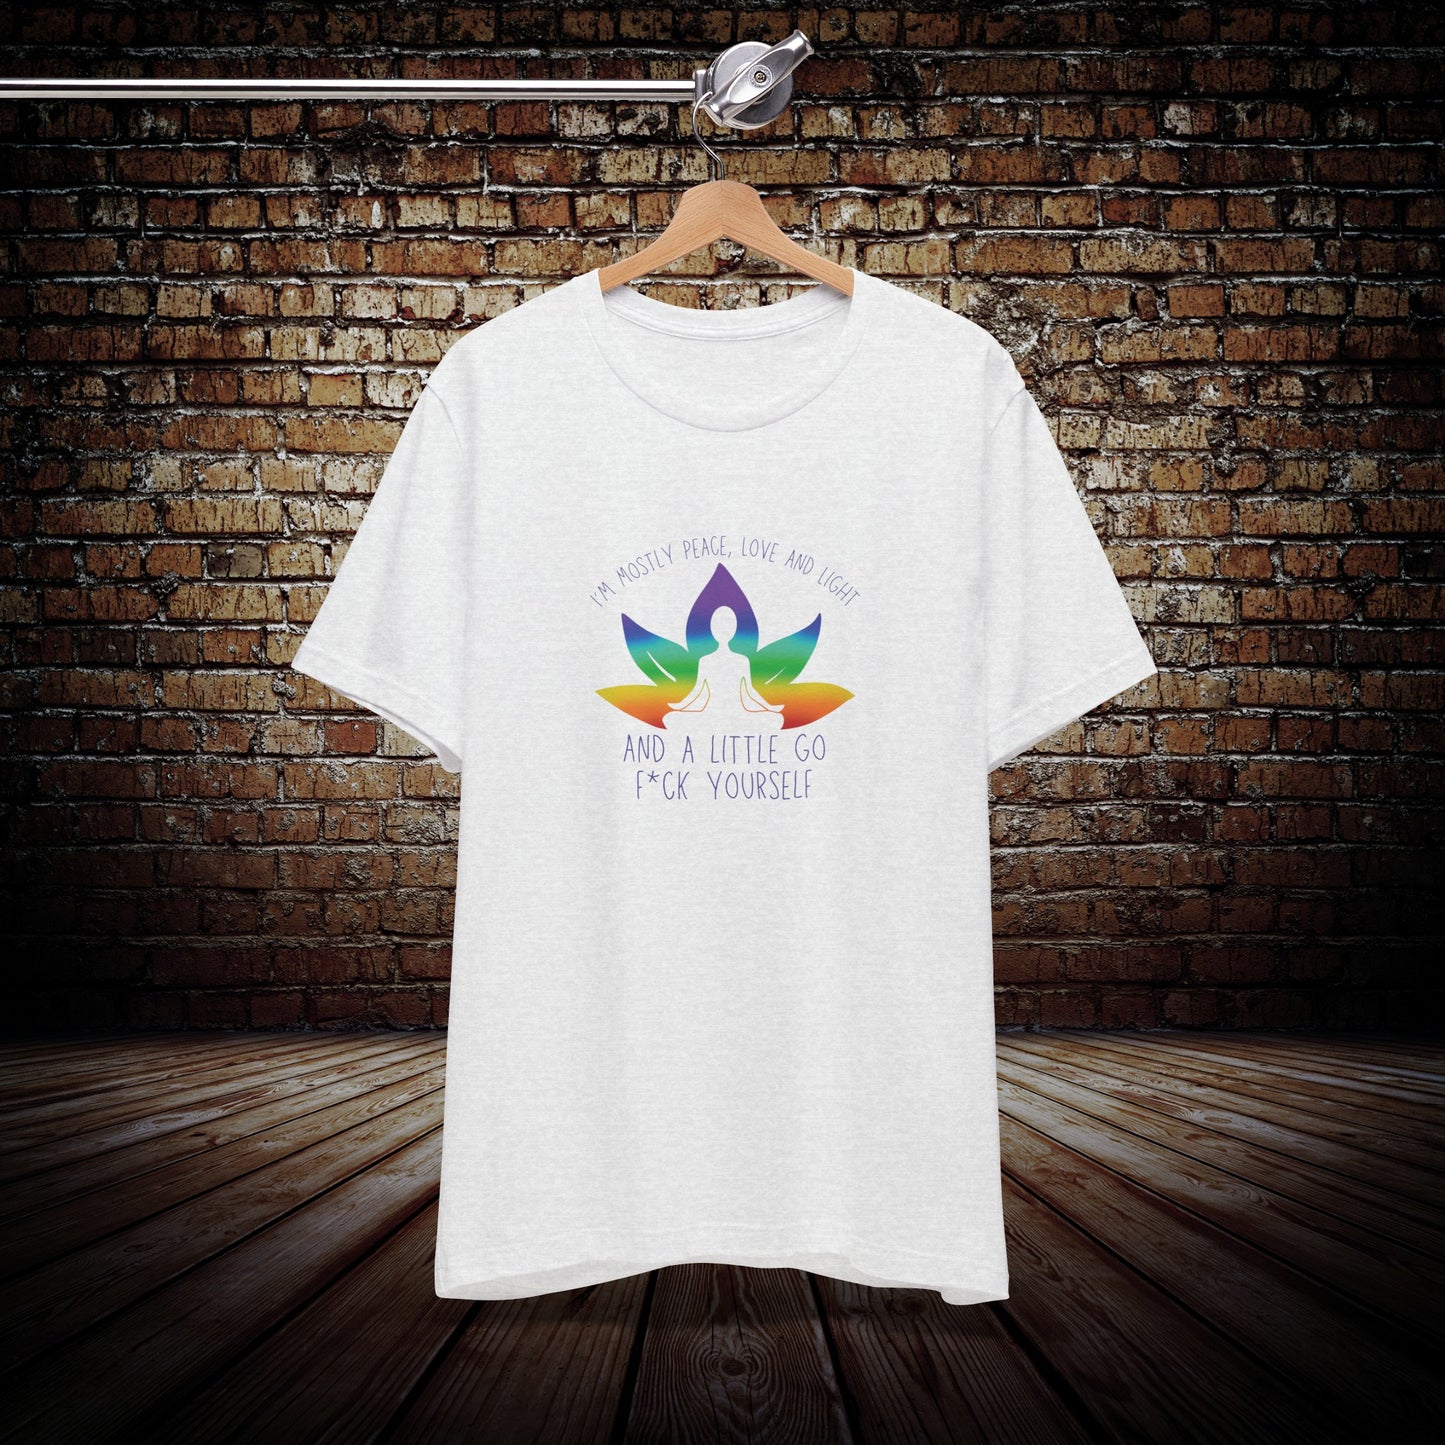 Mostly peace and love - Yoga Inspired T-Shirt